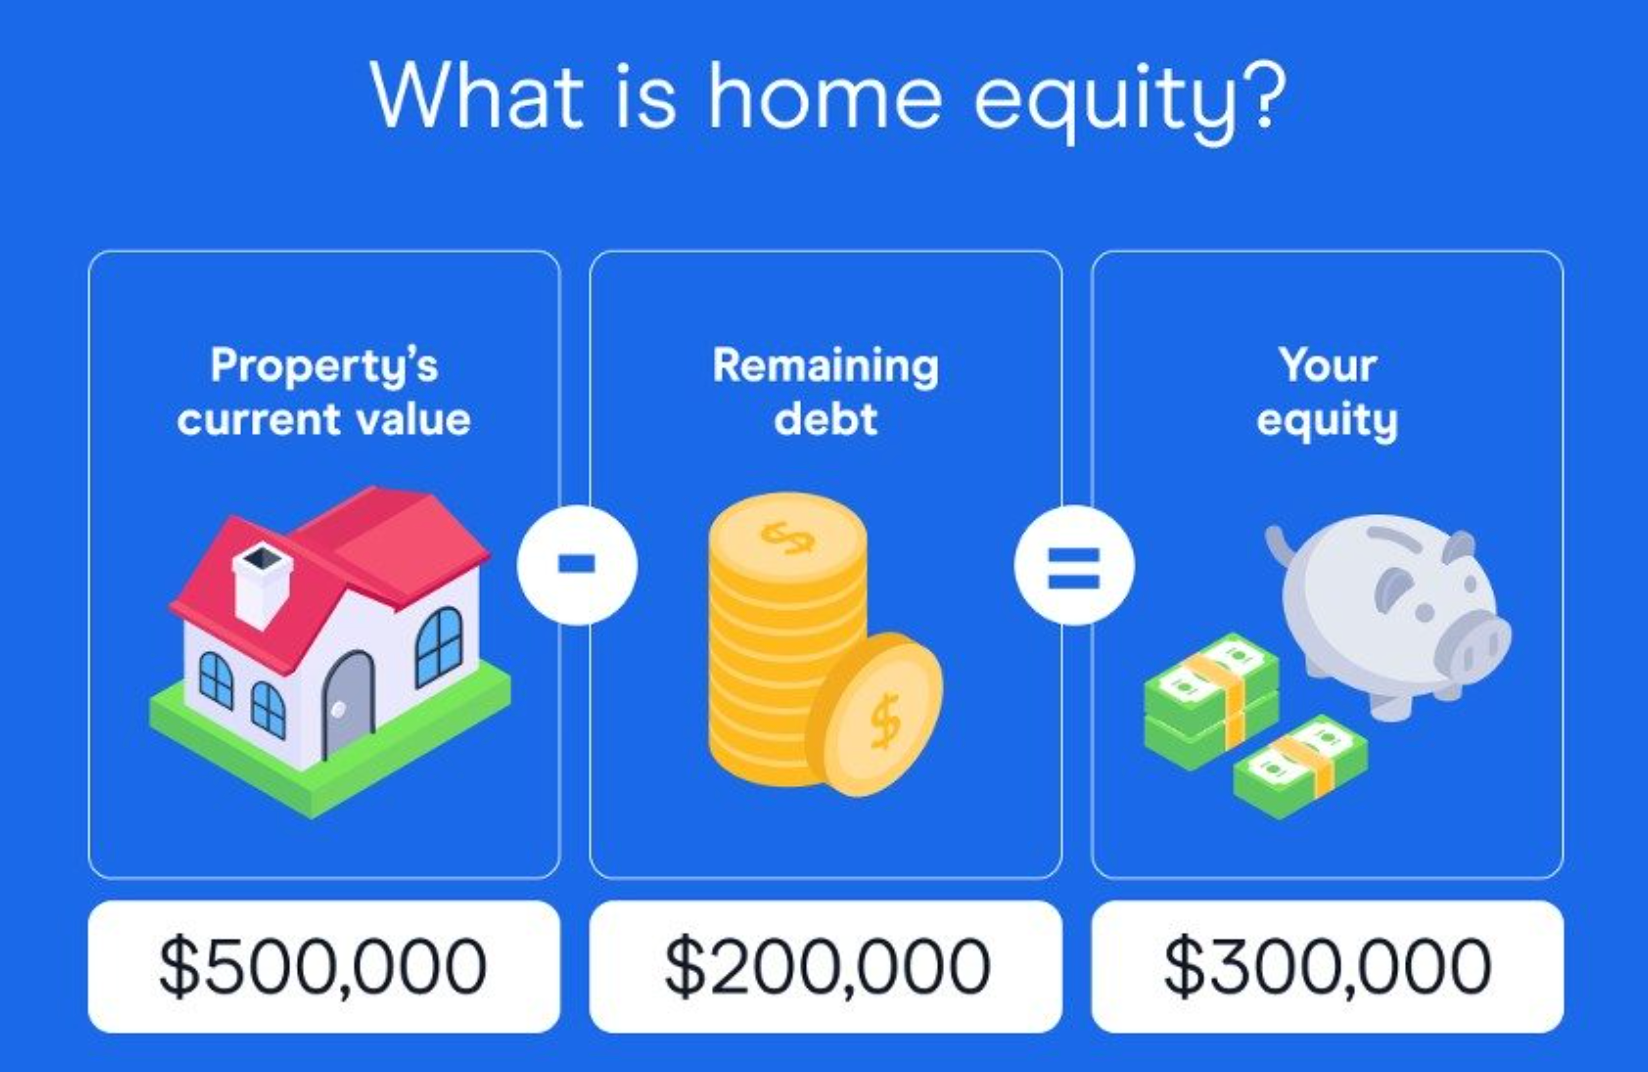 Working out your total equity position is the first step to understanding what your available options are